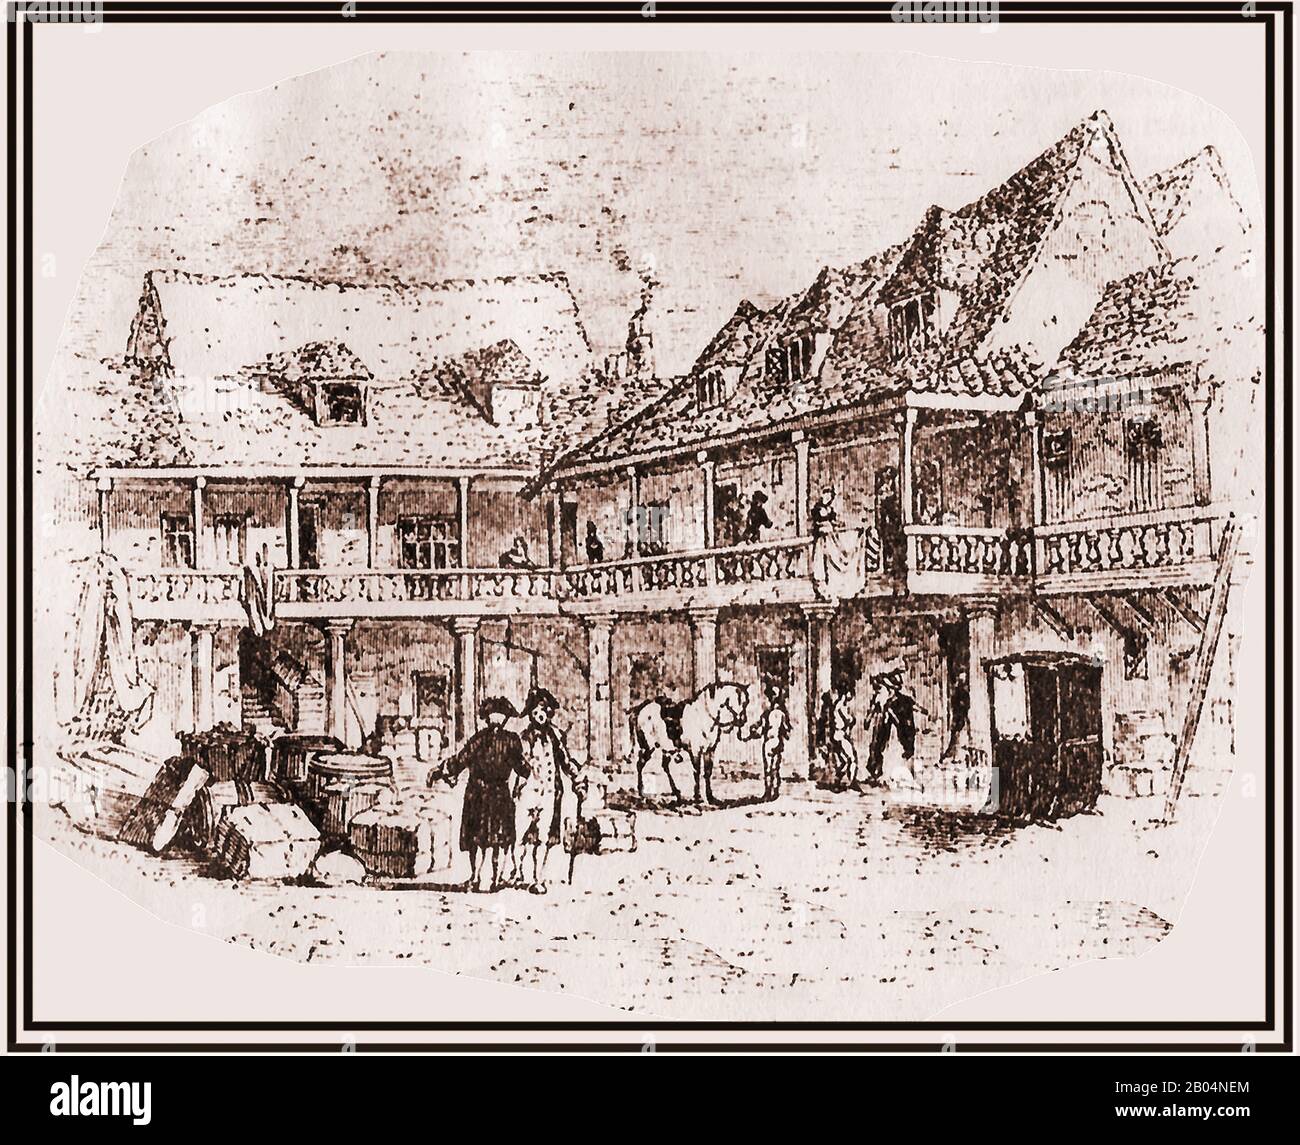 A late 18th century engraved image of the former  coaching yard  / courtyard of the TABARD INN, Southwark, London, England.  The inn was established in  1307 by the in  Abbot of Hyde as an ecclesiastical residence and served as lodgings for pilgrims visiting    the Shrine of Thomas Becket in Canterbury. It was demolished 1873 (though at least part of the original buildings were said to have been destroyed or pulled down during the great fire of London in 1666). Stock Photo